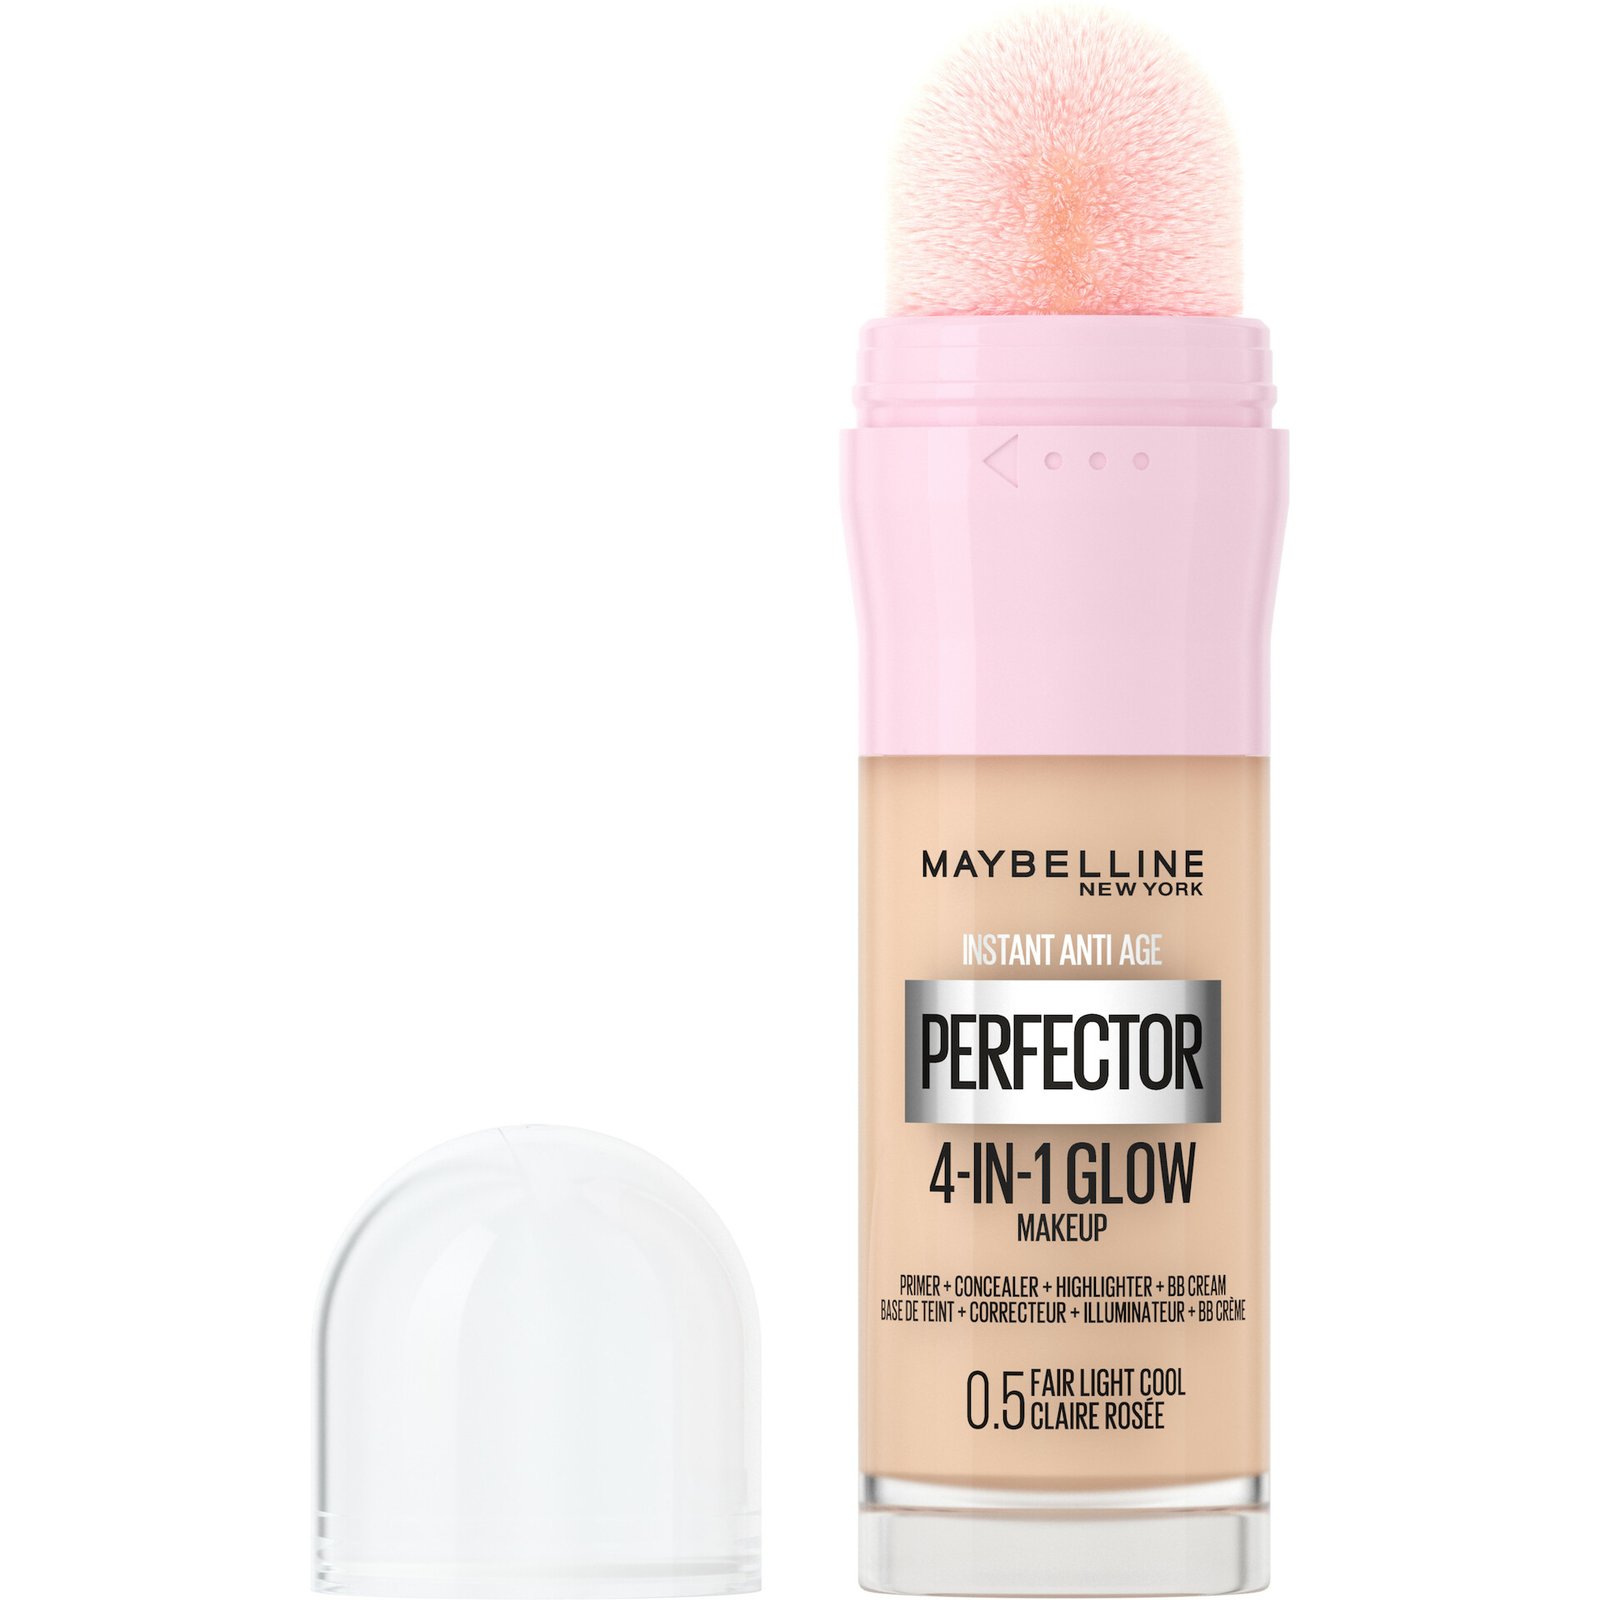 Maybelline New York Instant Perfector 4-in-1 Glow Makeup Foundation 0.5 Fair Light Cool